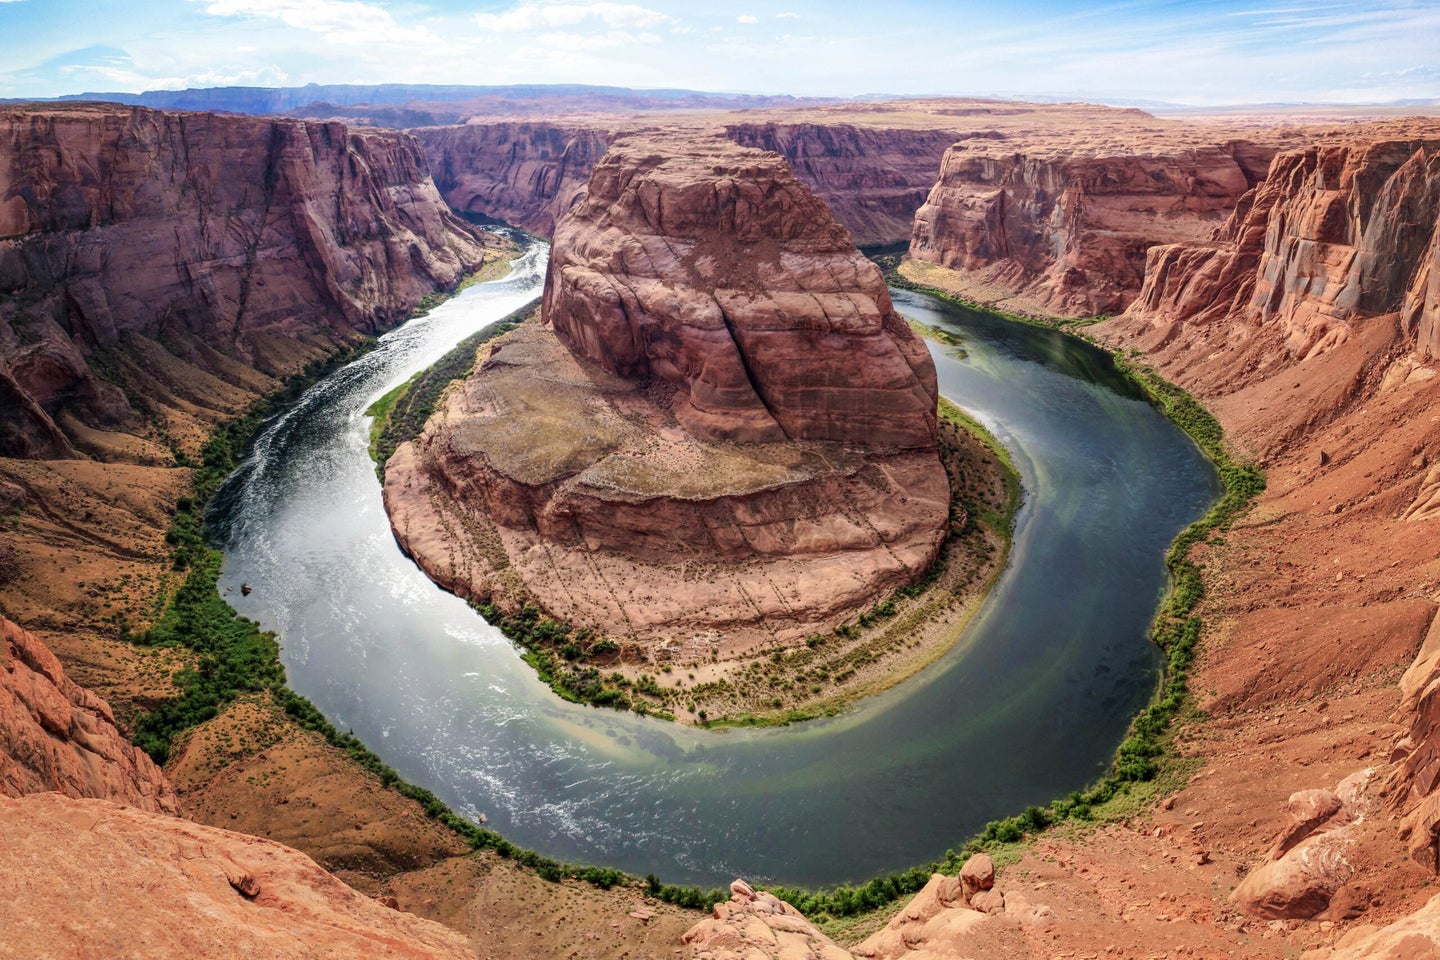 The Horseshoe Bend in the Colorado River.